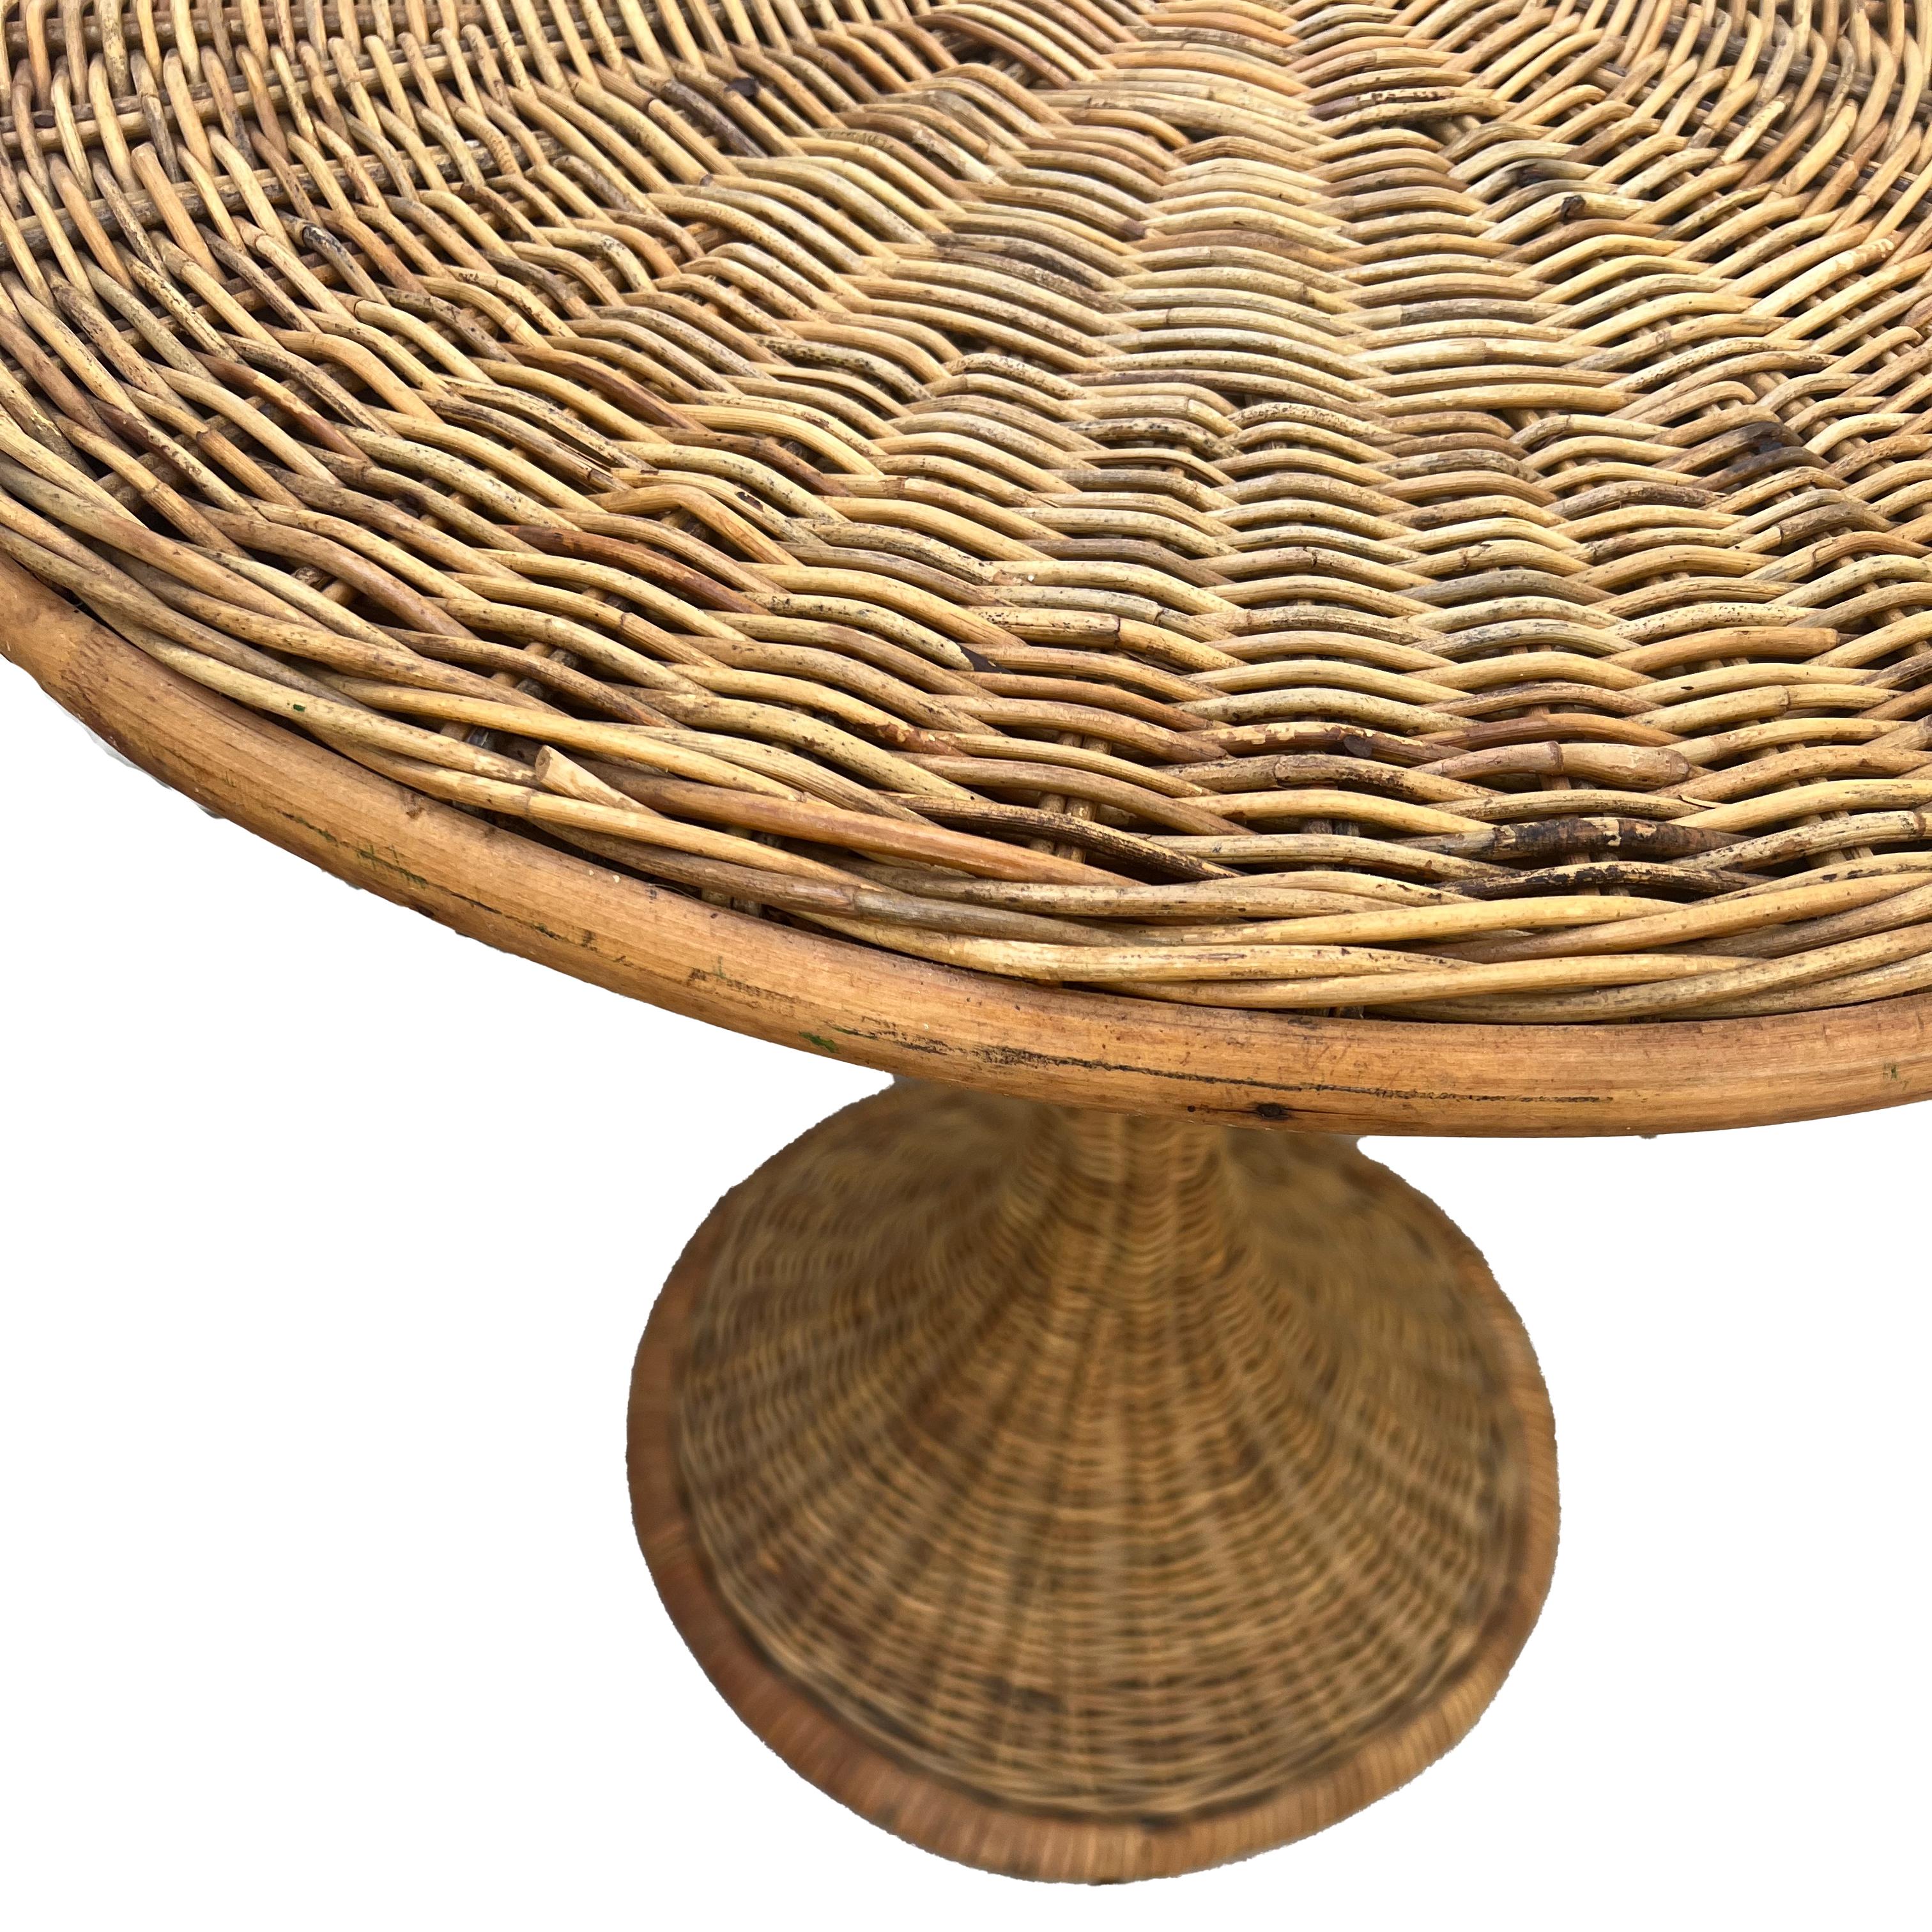 This organic modern round wicker end/side table would look great next to your favorite lounge chair, between two side chairs, or pulled up to your sofa. It will fit in nicely with a Boho Chic, Hollywood Regency, modern, or Mid-Century Modern,